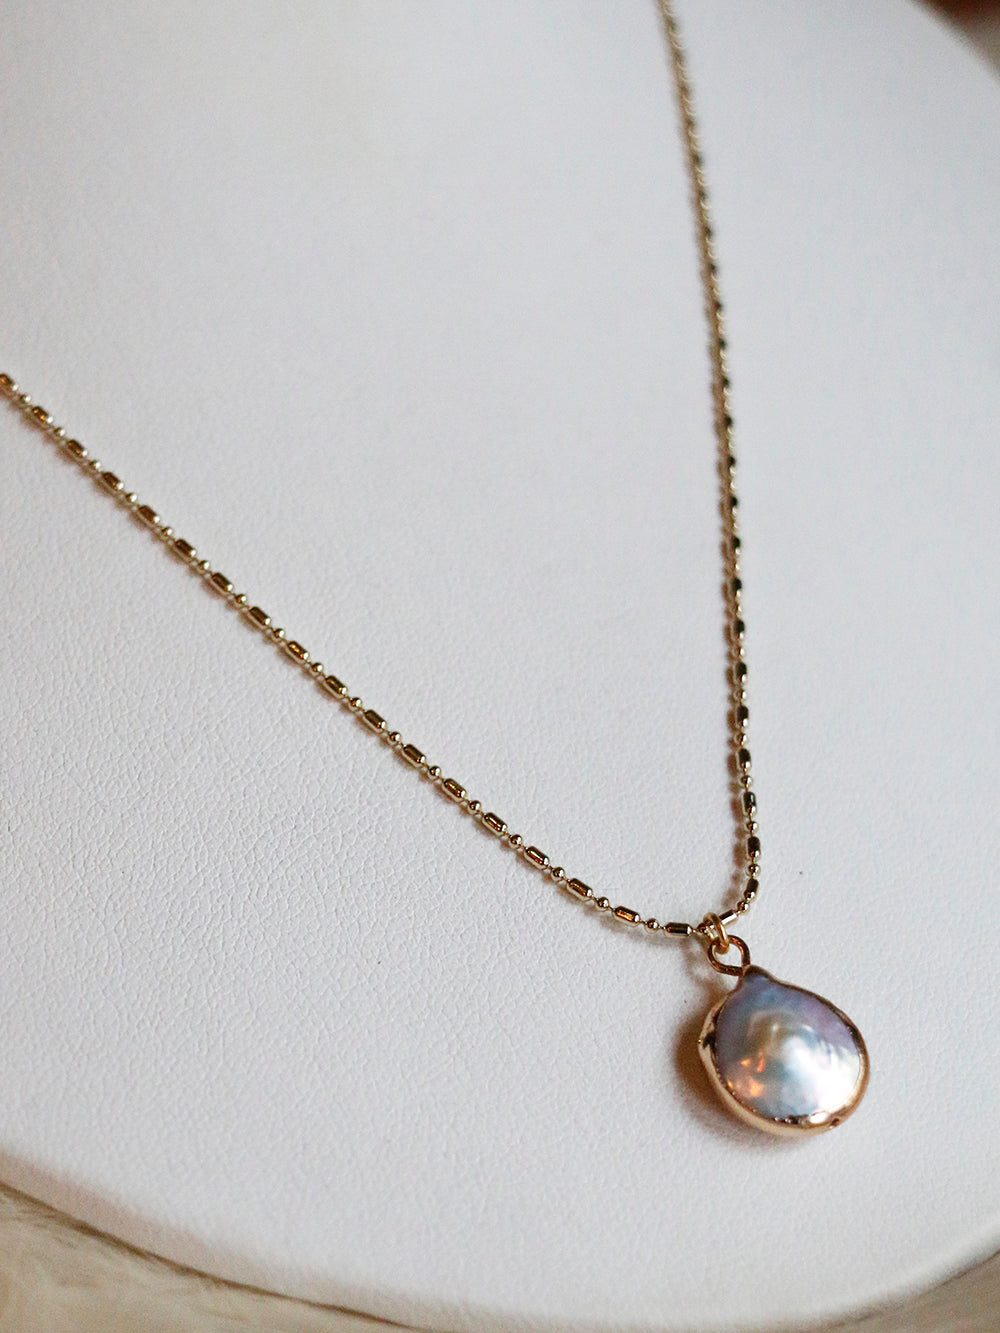 Nuance Pearl Necklace